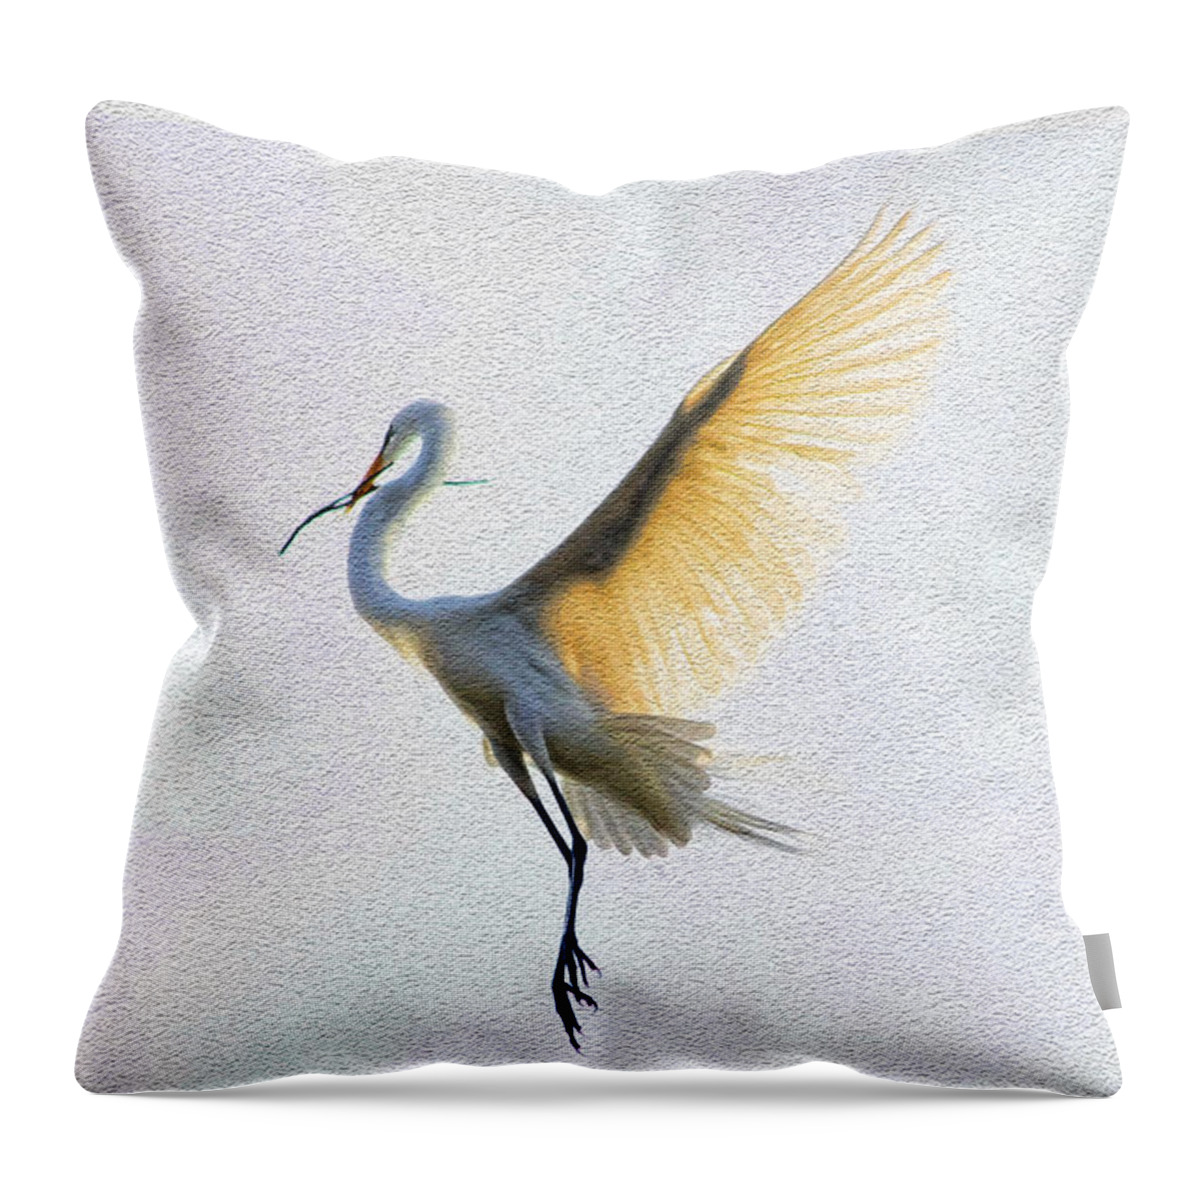 Egret Throw Pillow featuring the photograph Carrying the Twig by Ola Allen